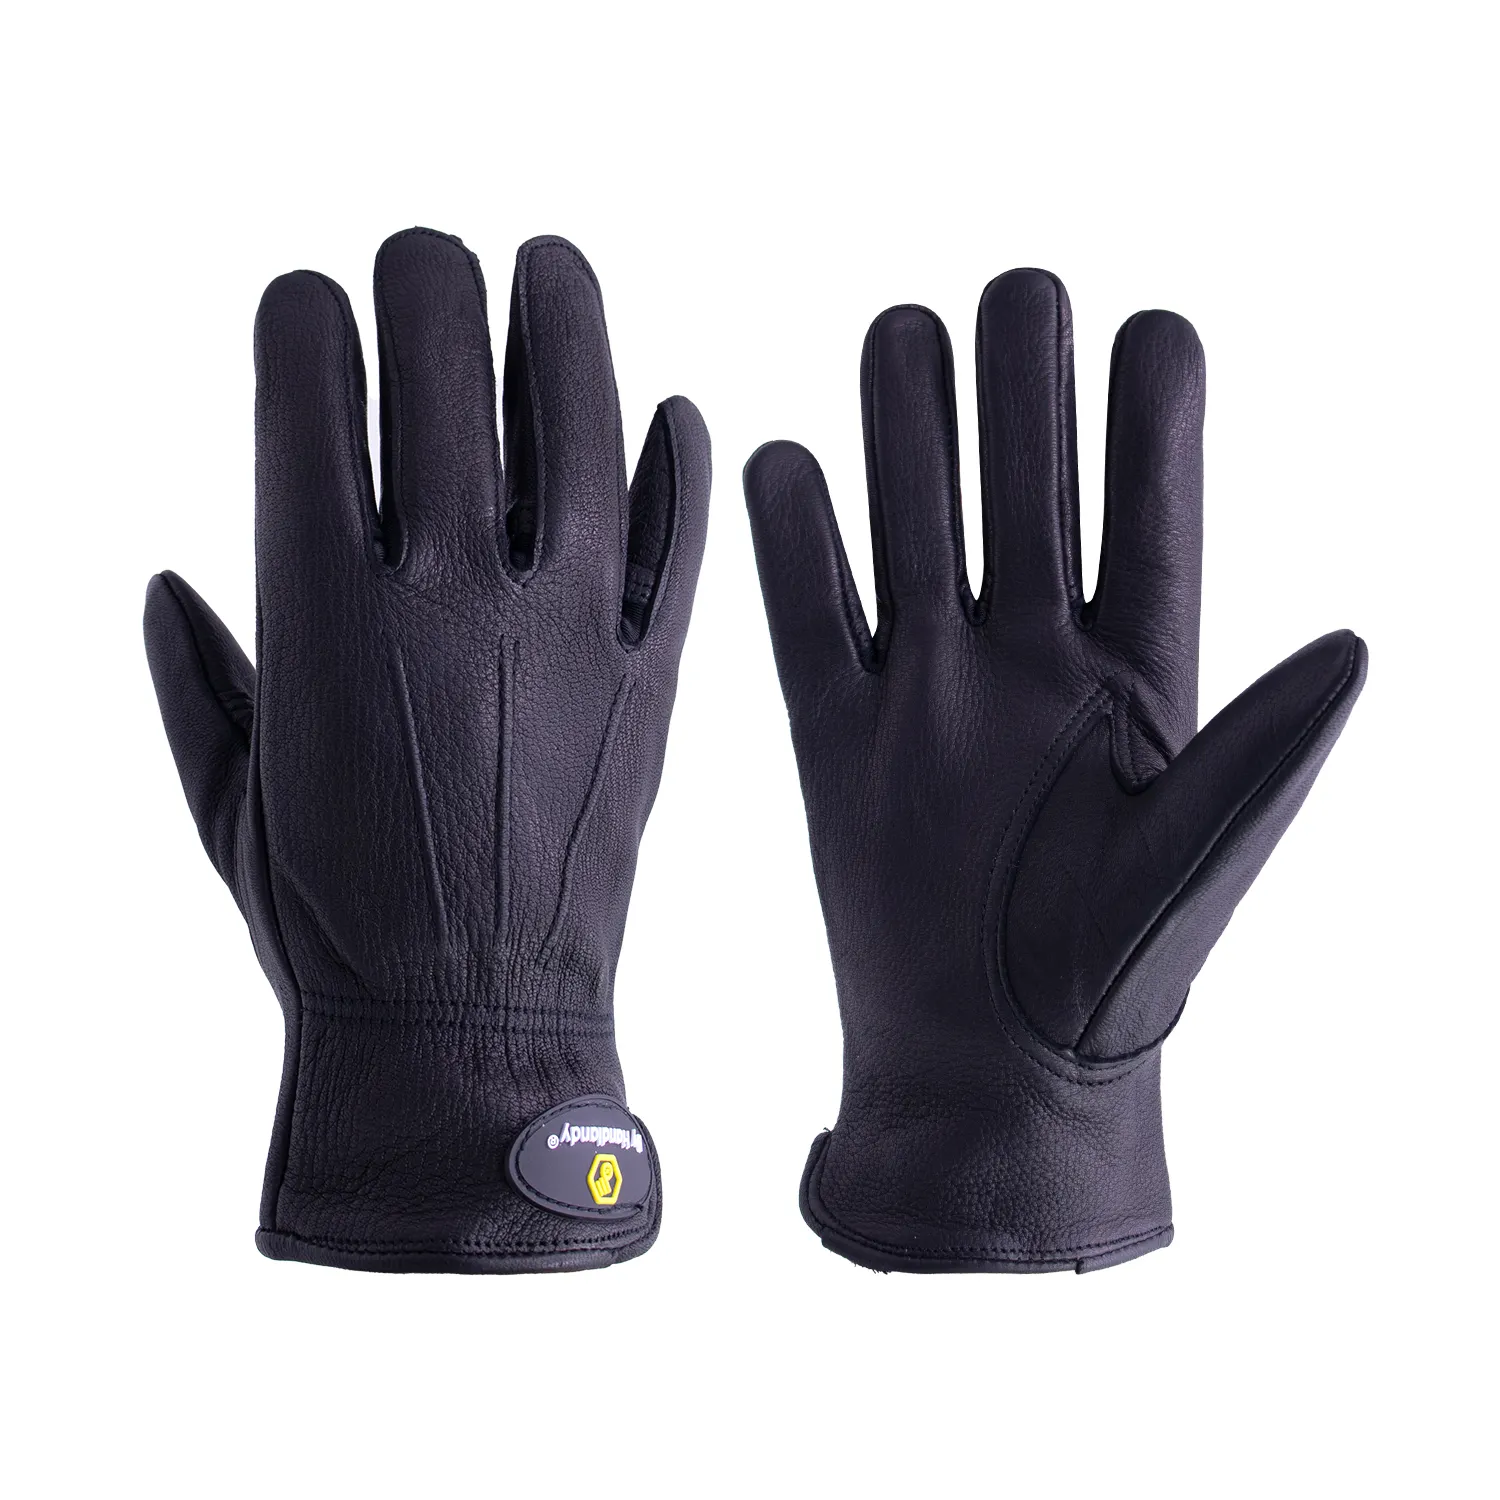 HANDLANDY Hand Protection Driver Outdoor Electrical Machine Safety Work Out Mechanical Gloves Factory Direct Buyers Deerskin